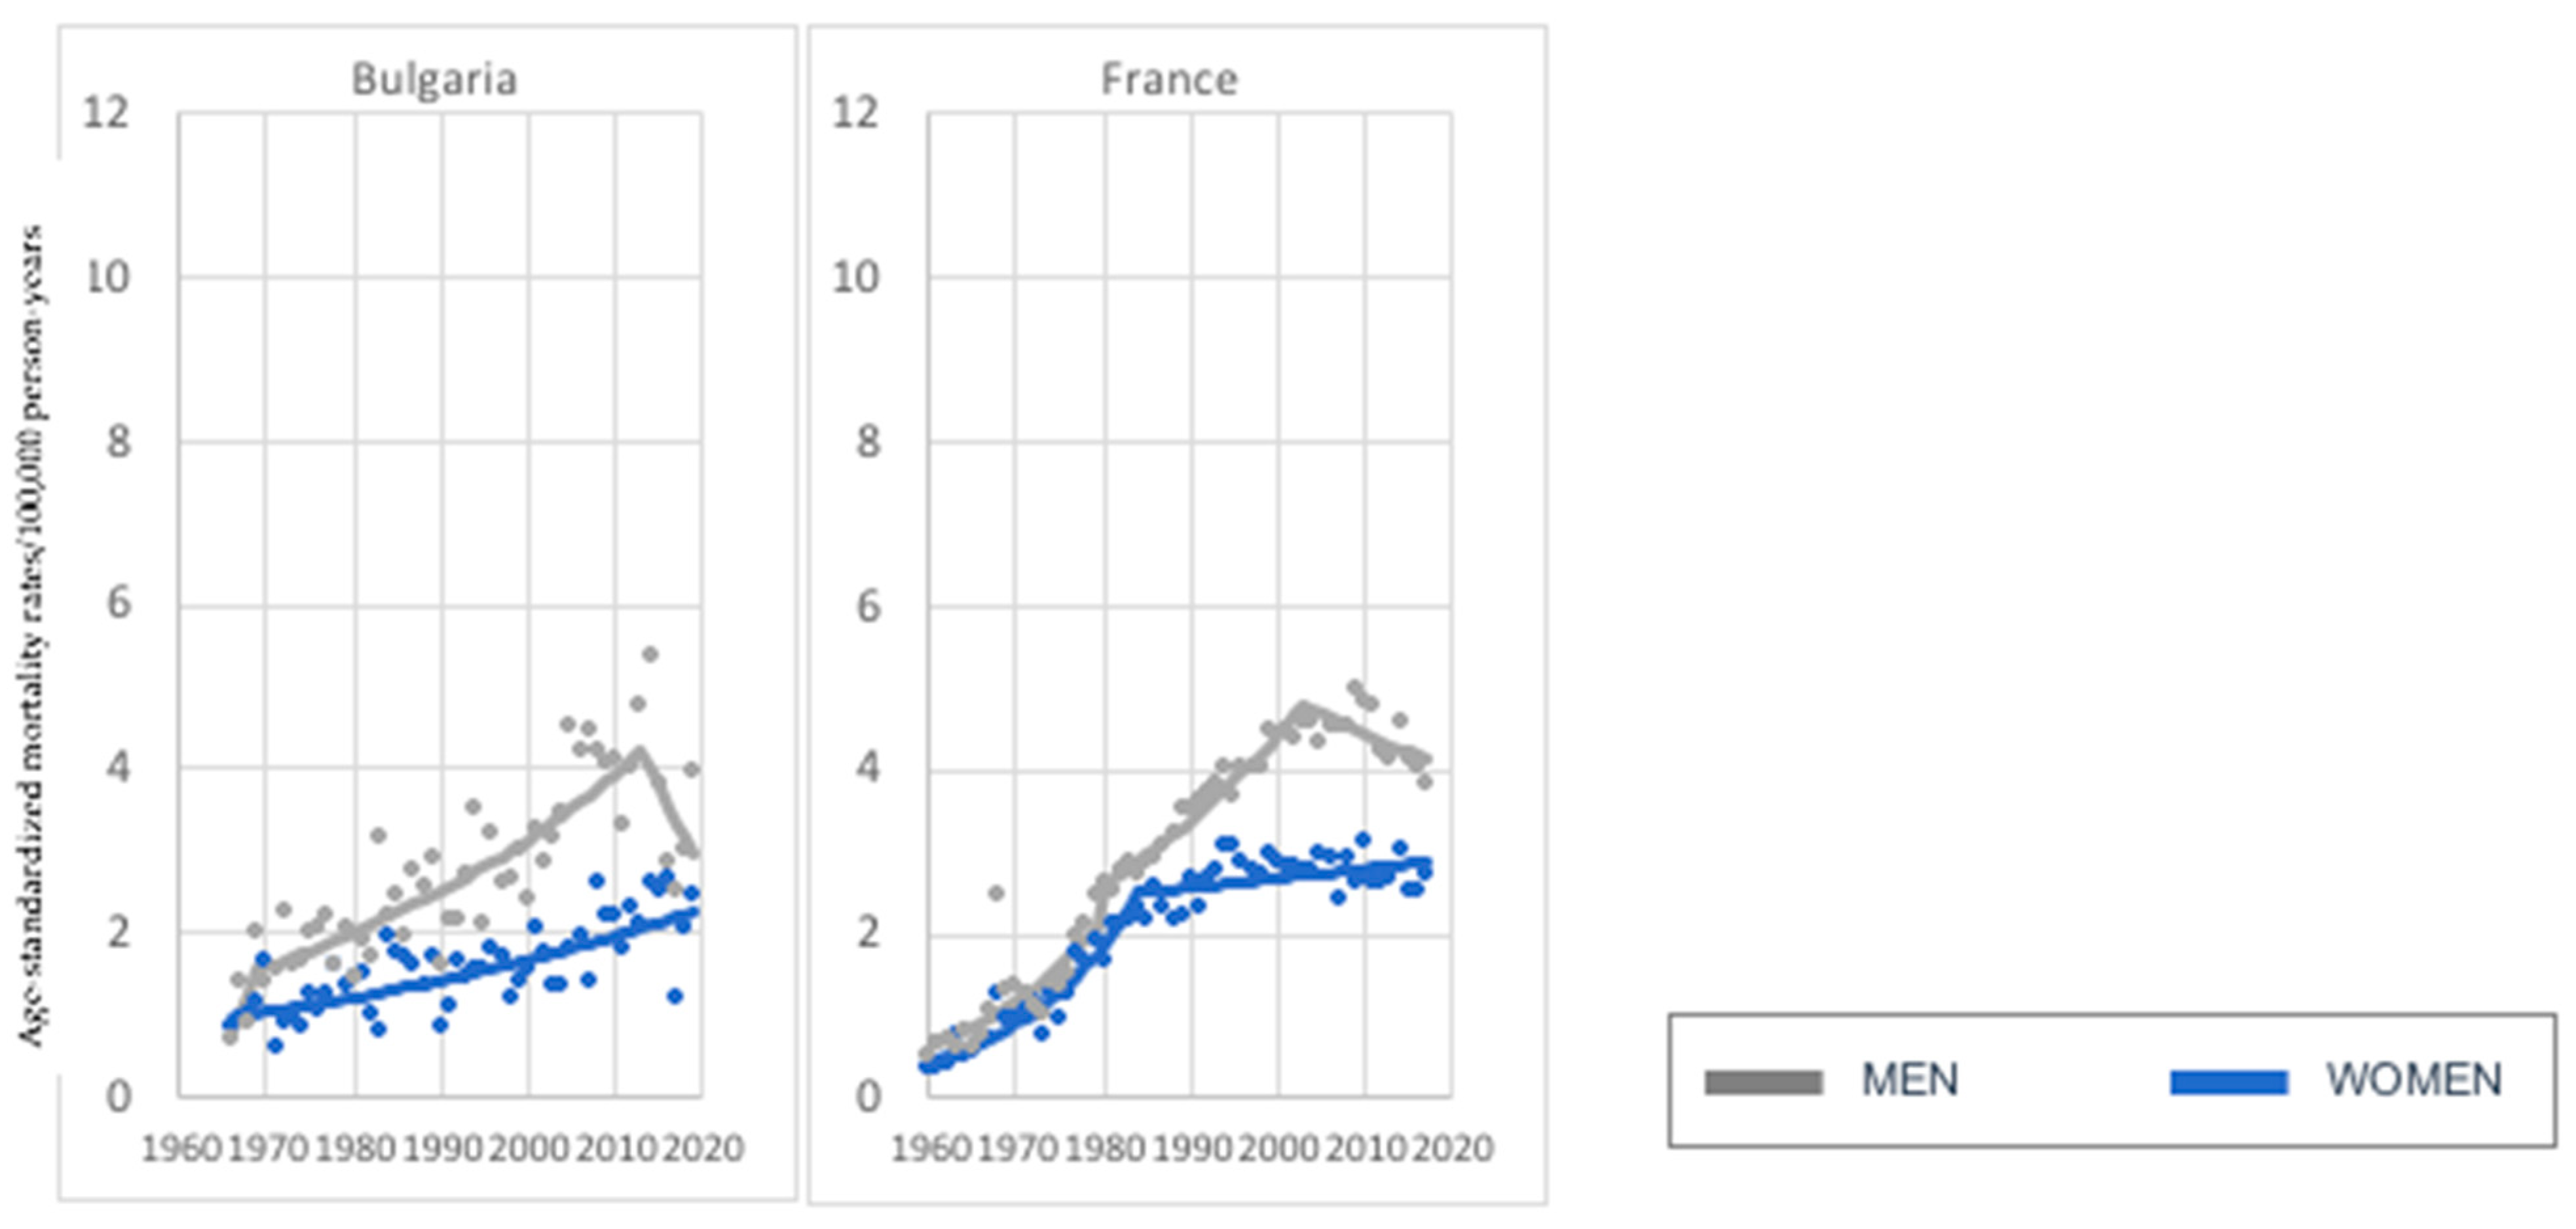 Trends in mortality patterns in two countries with different